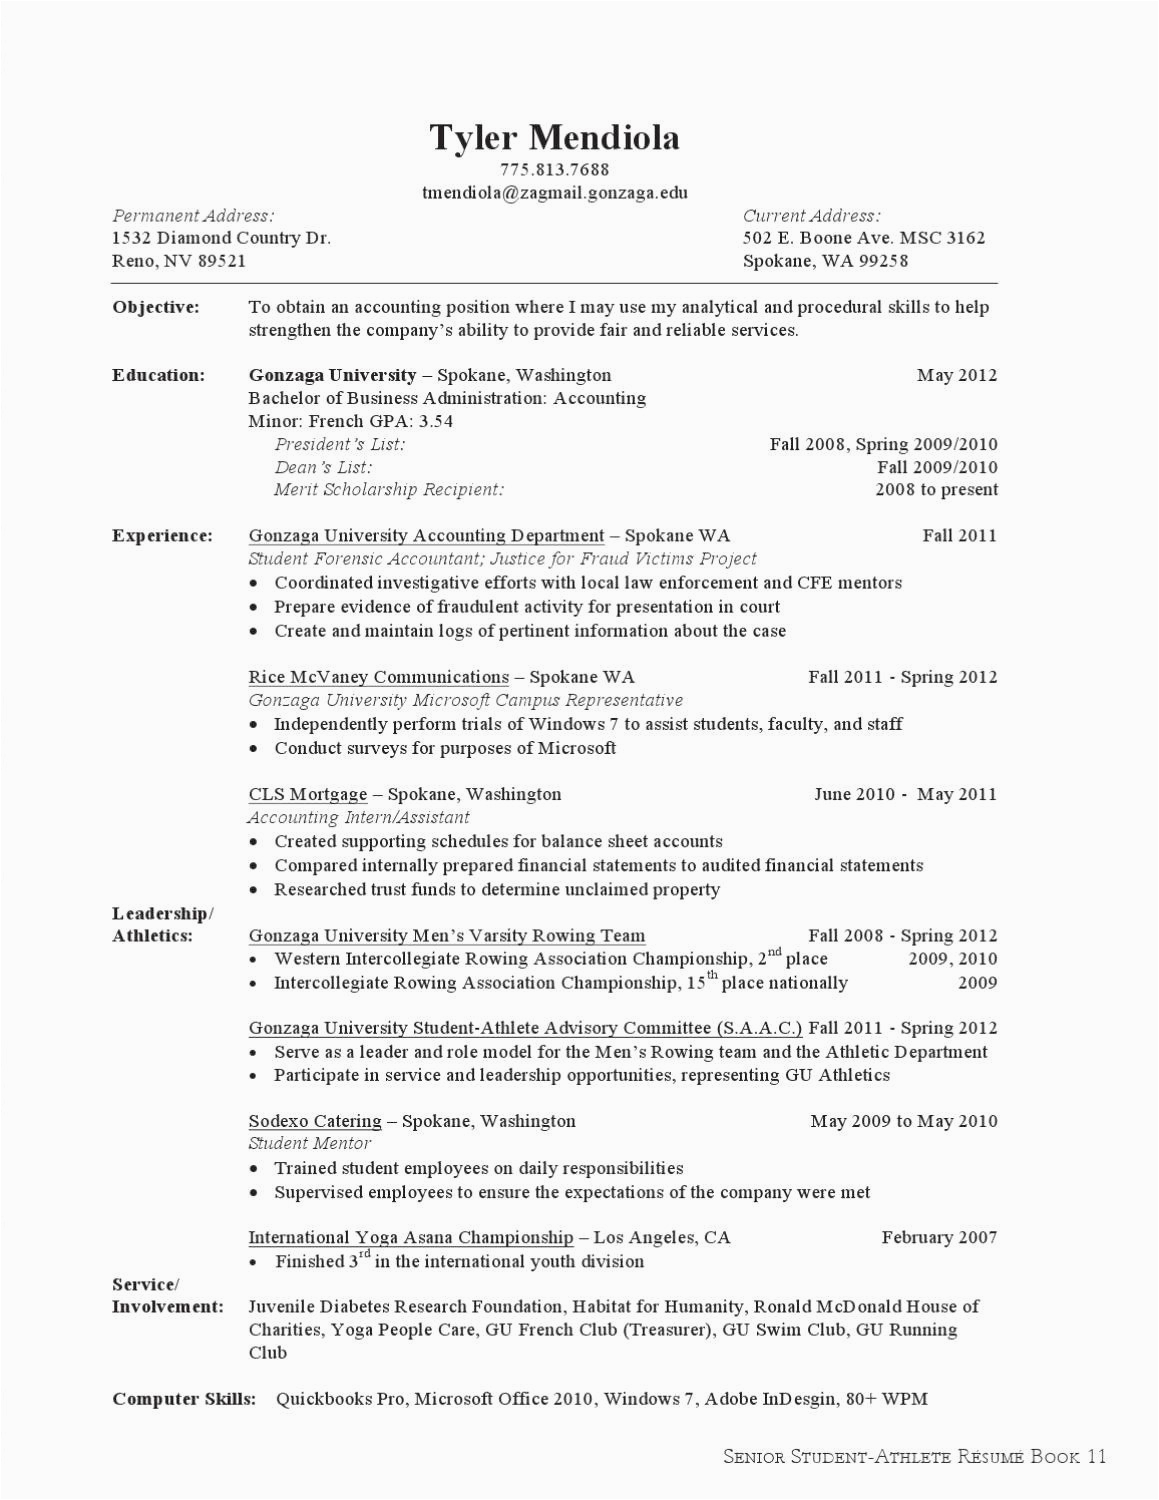 Sample Resume for College Student athlete 23 Student athlete Resume Example In 2020